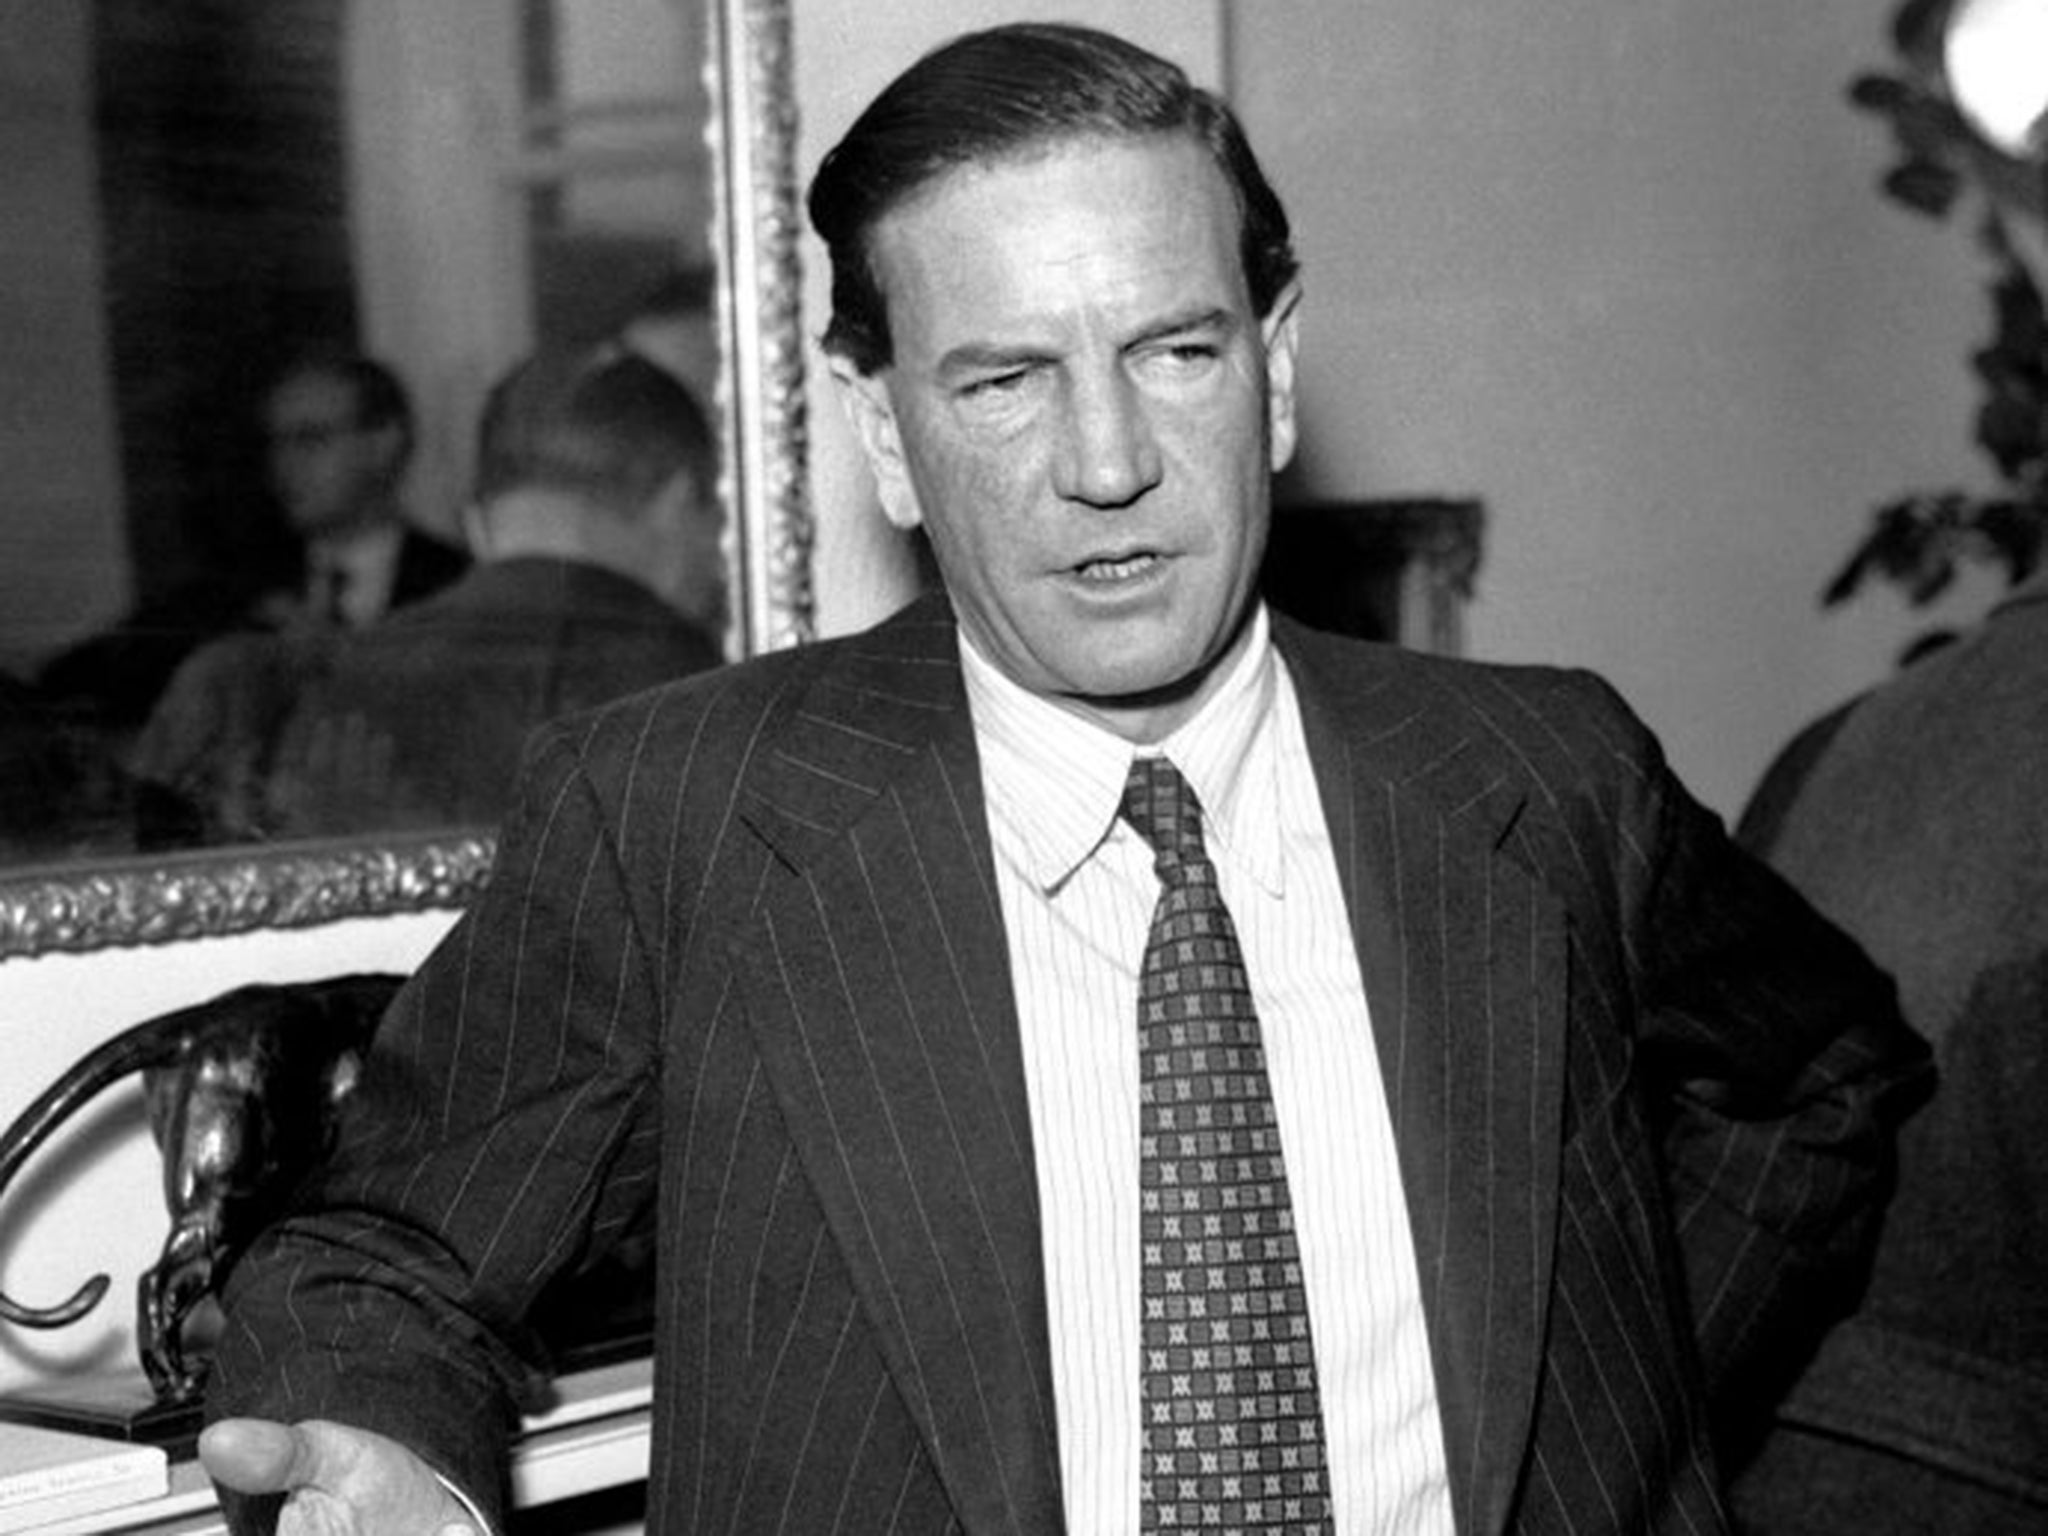 Kim Philby was not unmasked for 12 years after the defection of fellow Cambridge spies